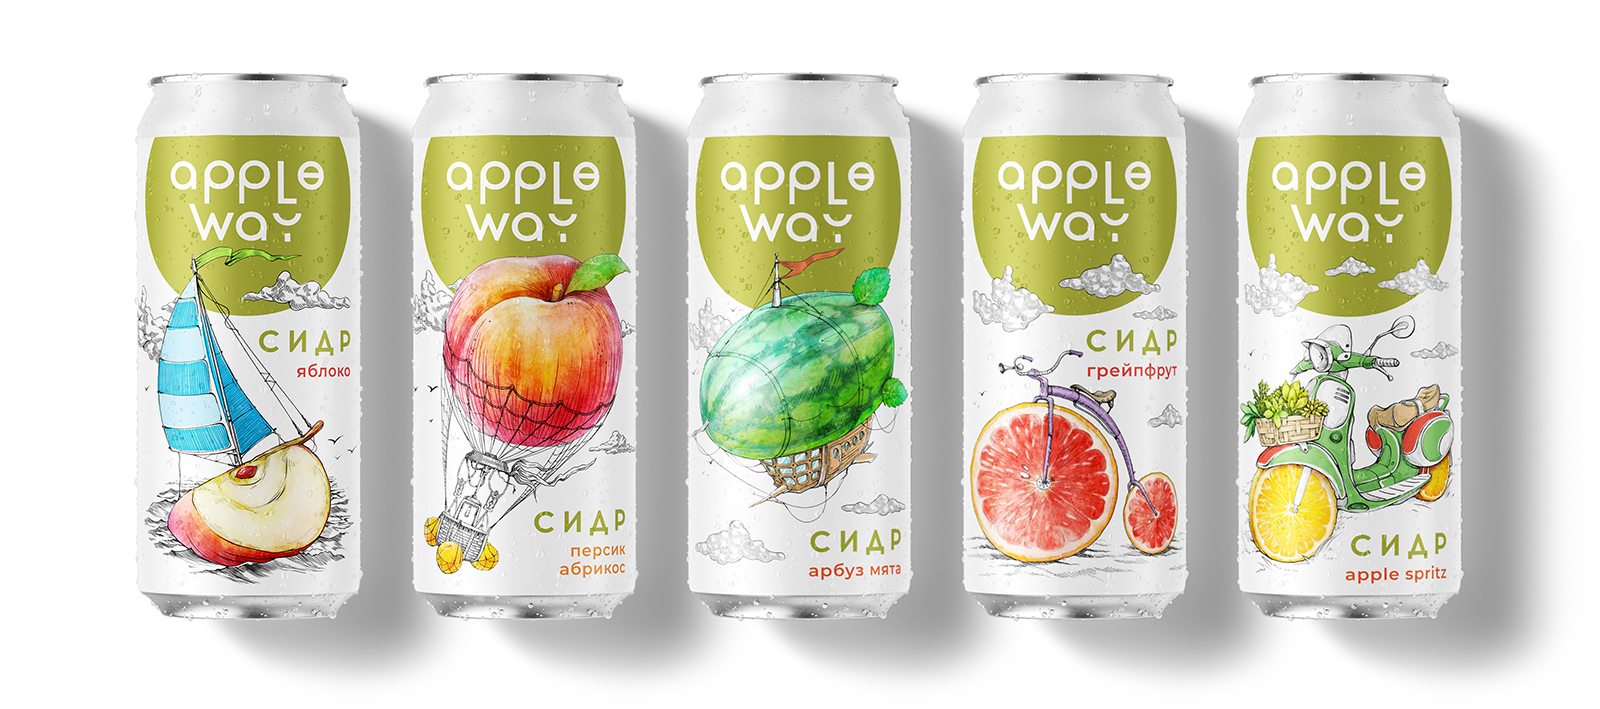 Apple Way: Crafting Quality Cider with Unique Design and Packaging by CUBA Branding